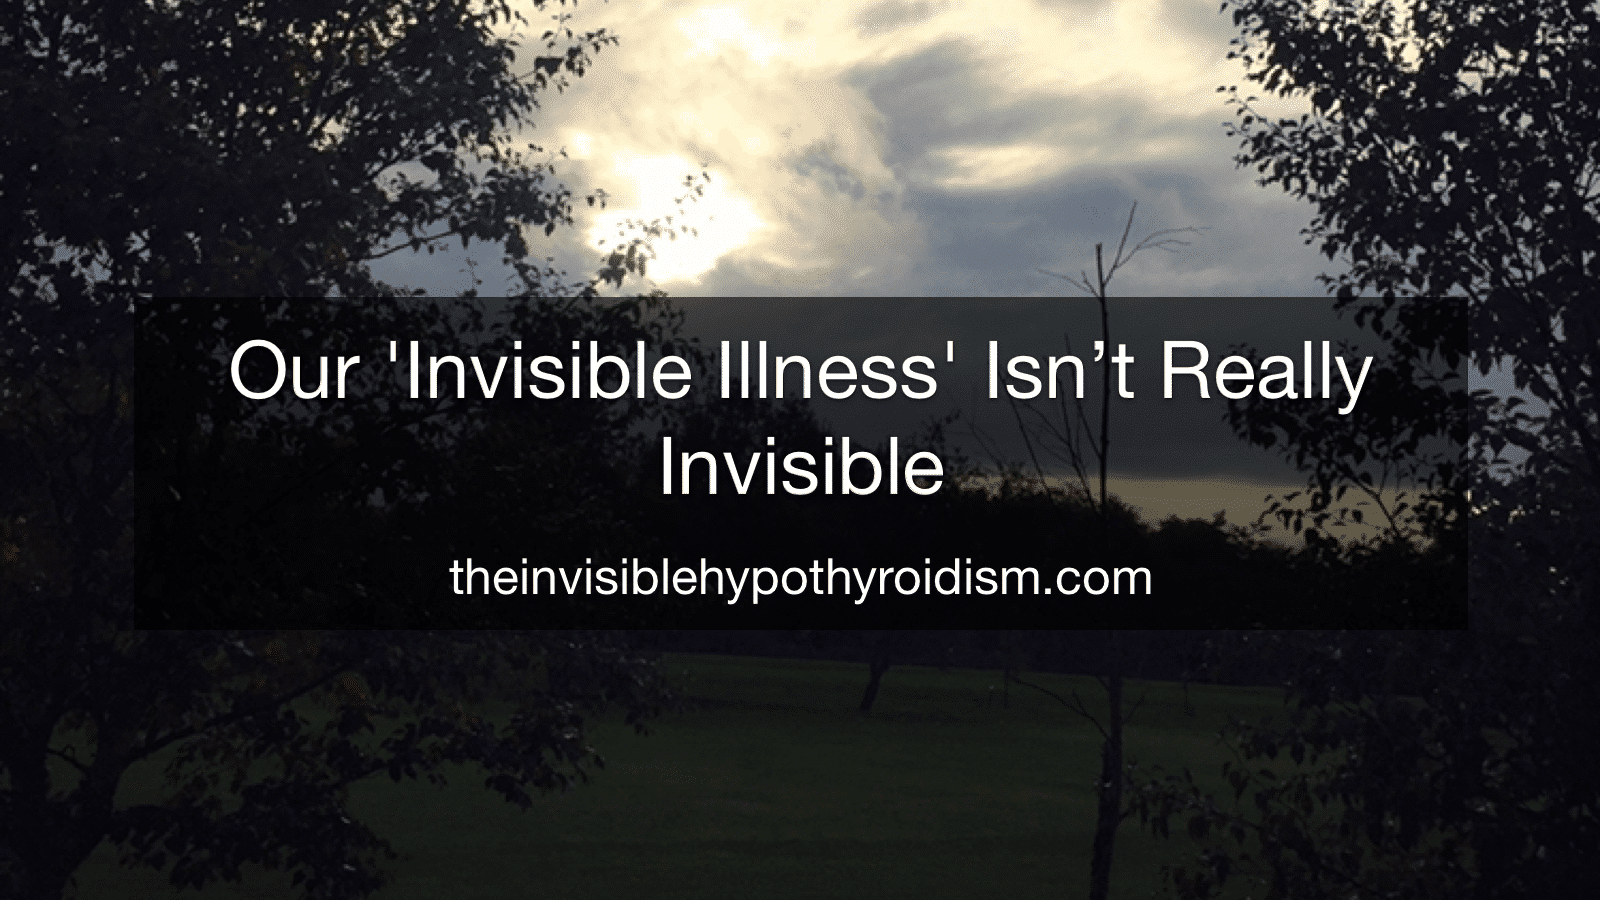 Our 'Invisible Illness' Isn’t Really Invisible